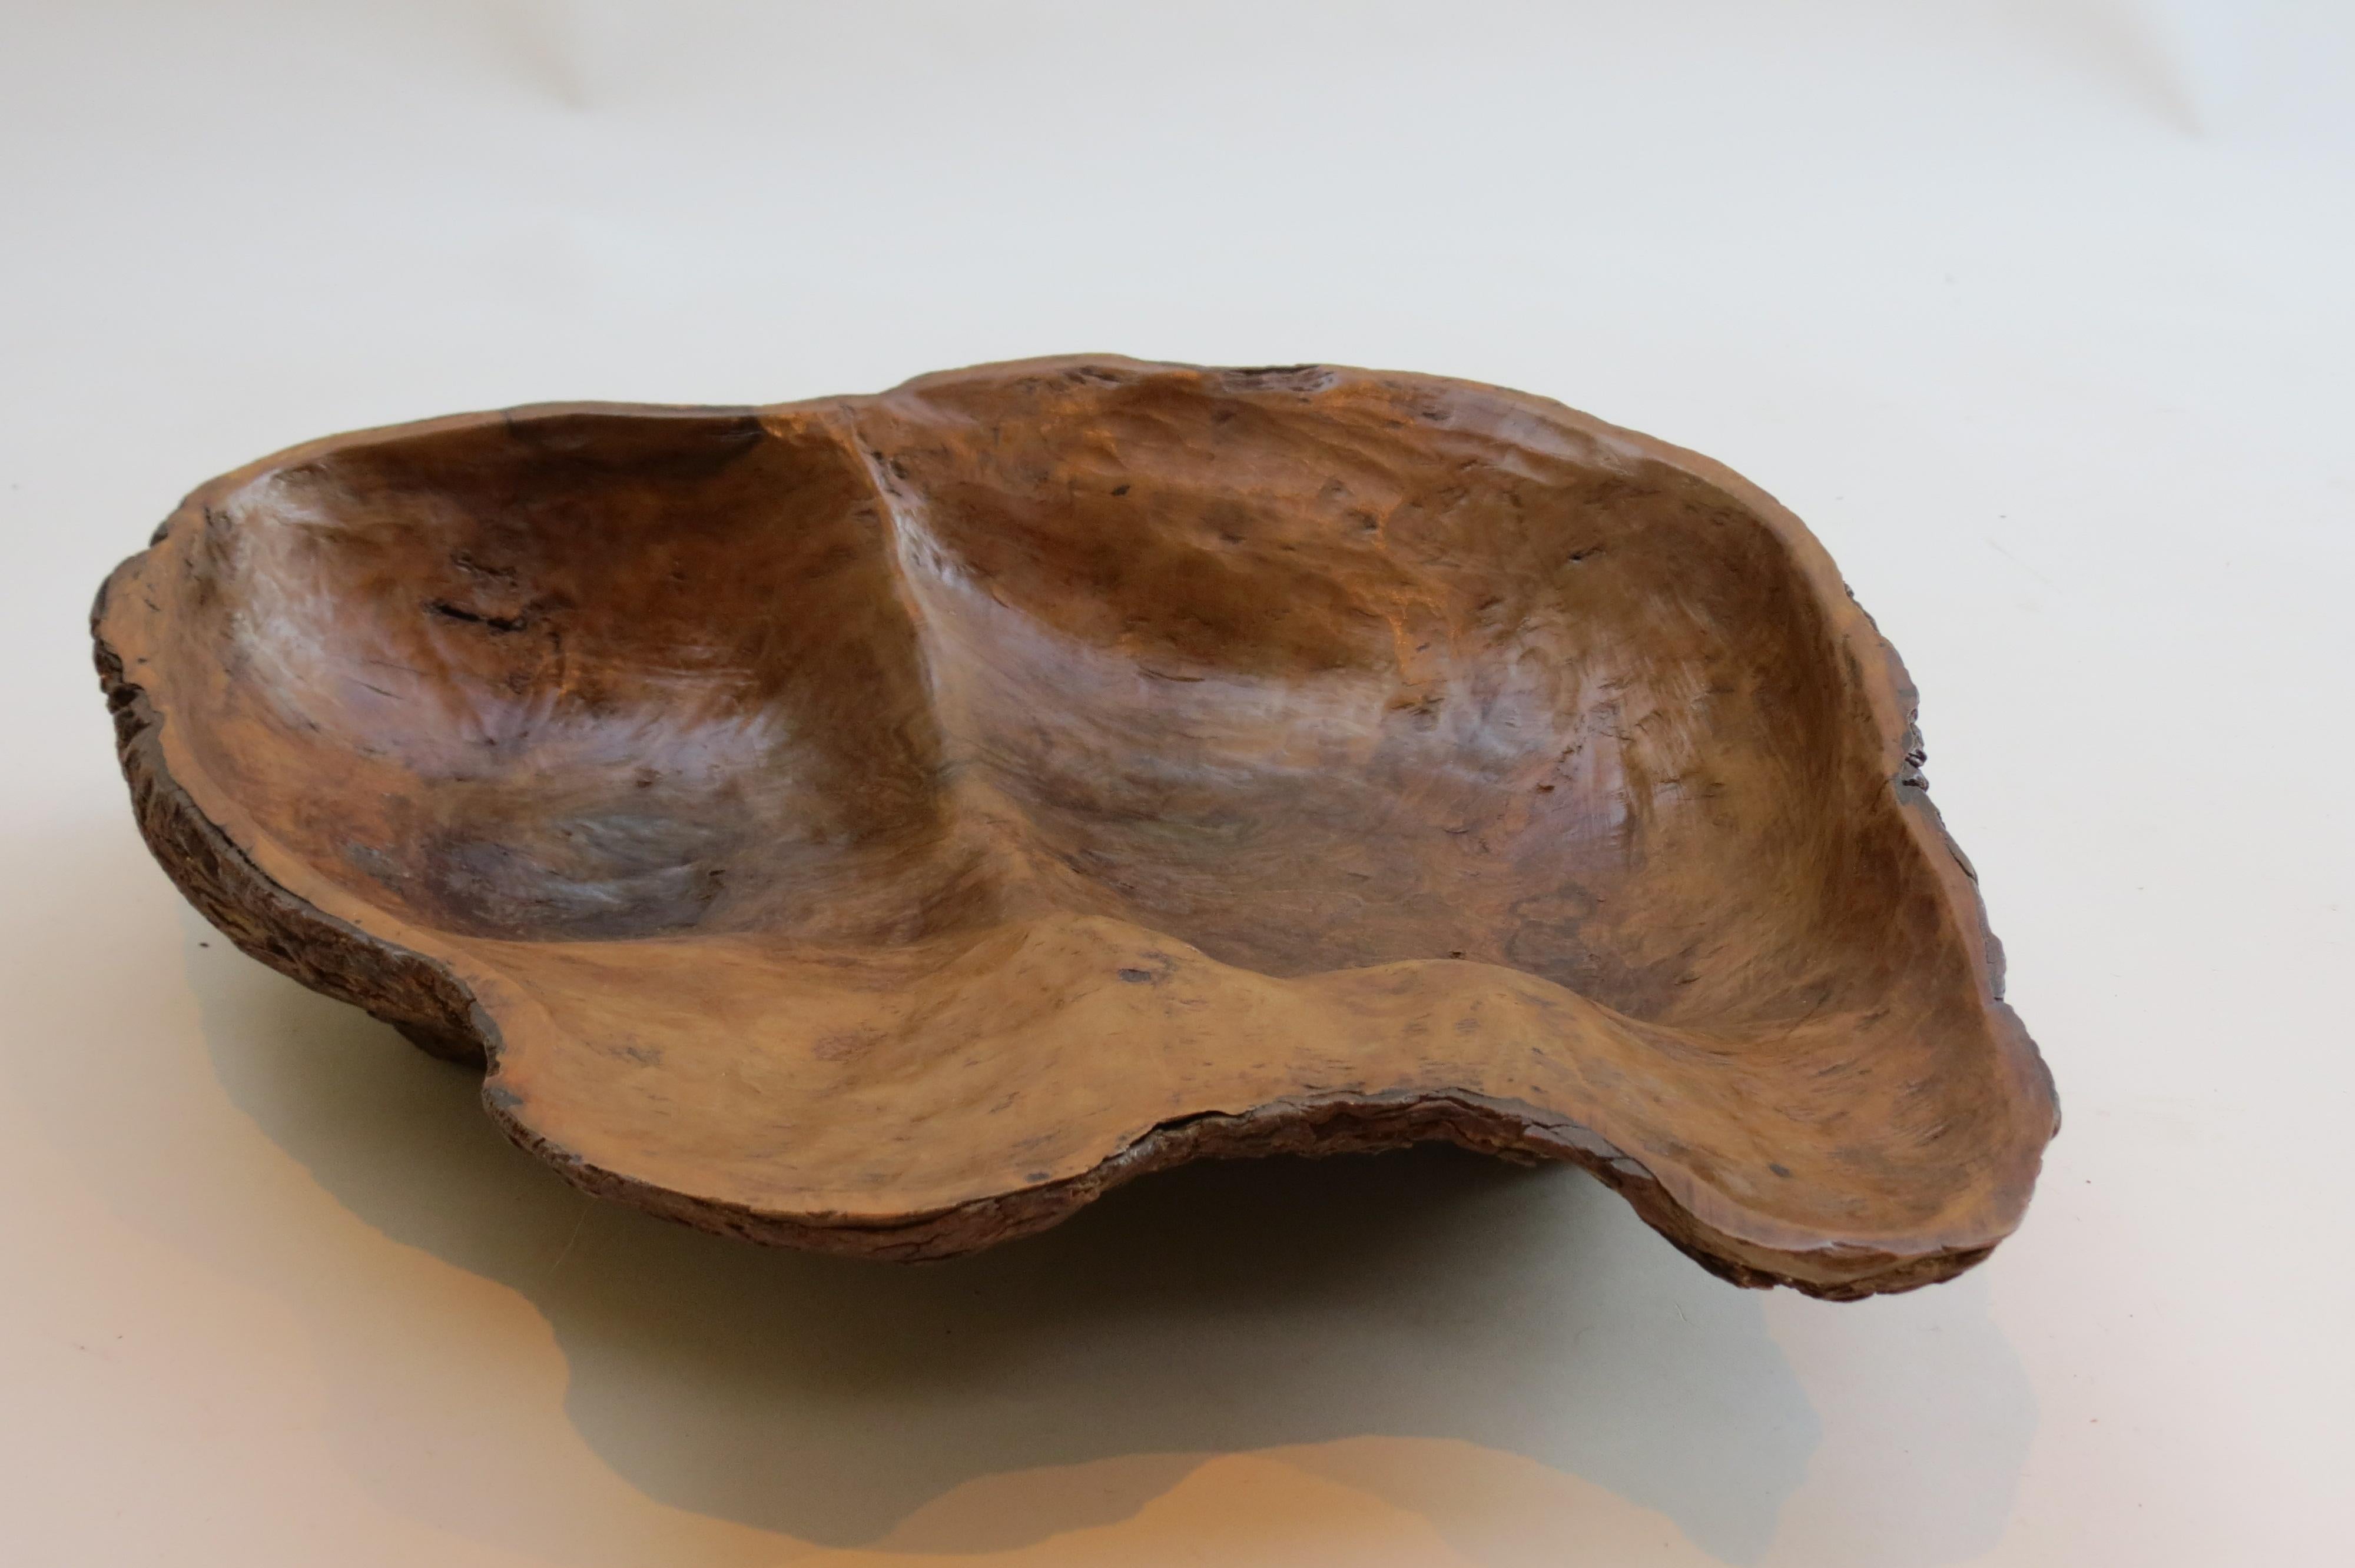 Wooden bowl from the 1970s made from olive wood. The bowl has been hand shaved to follow the contours of the wood. The underside of the bowl retains the bark and natural appearance.